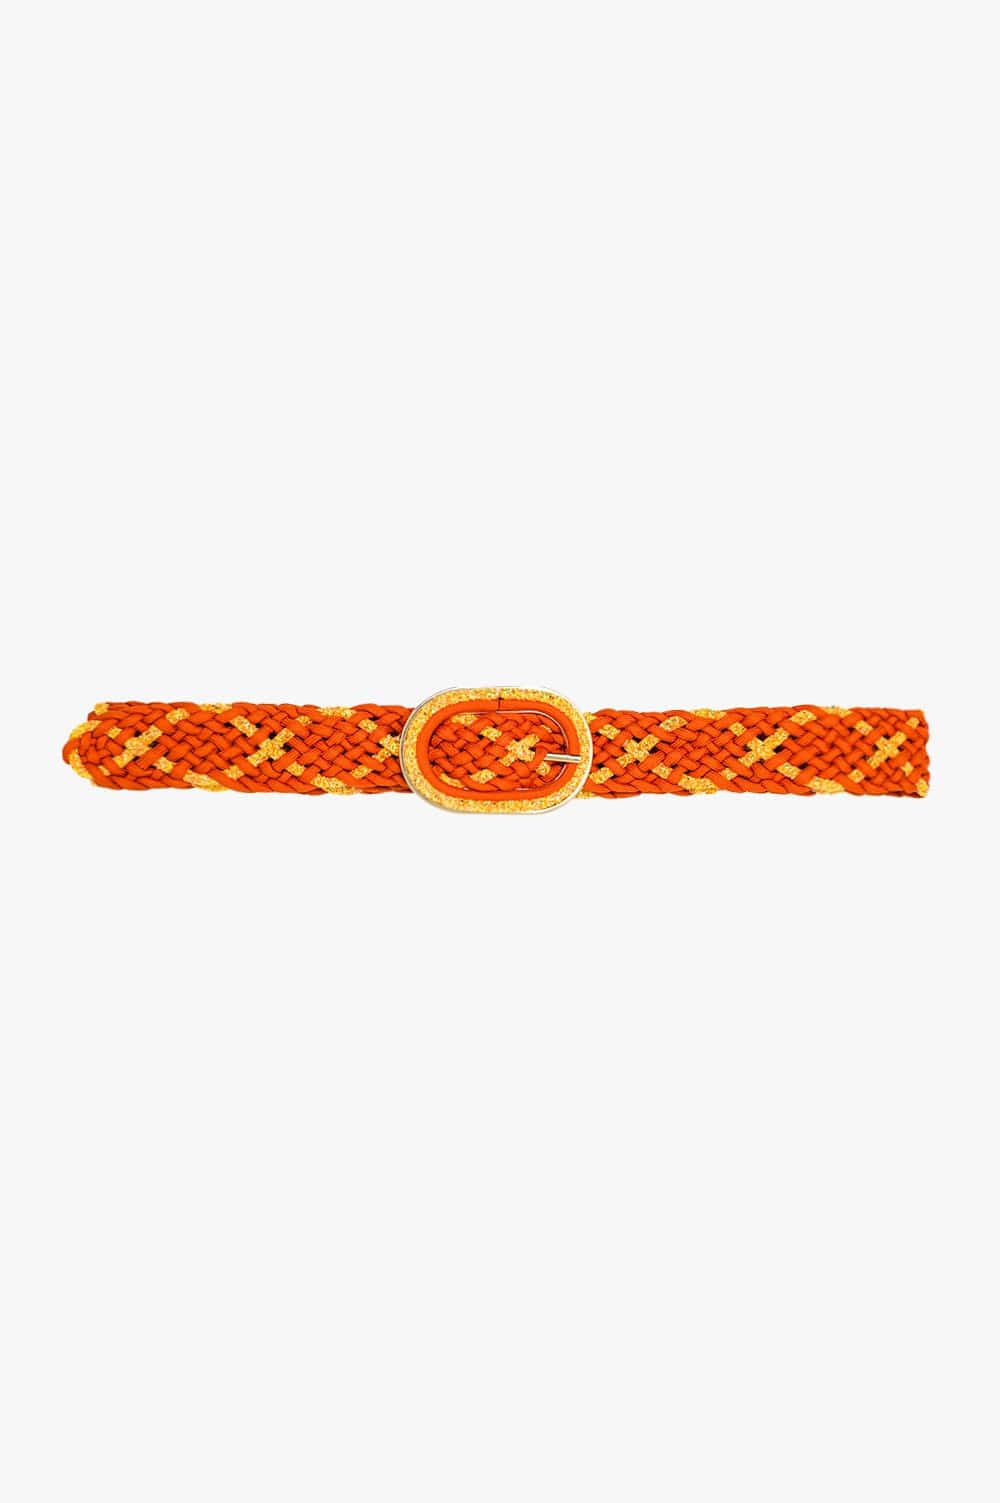 Q2 Women's Belt One Size / Orange Orange Braided Belt With Intertwined Gold Thread And Oval Buckle